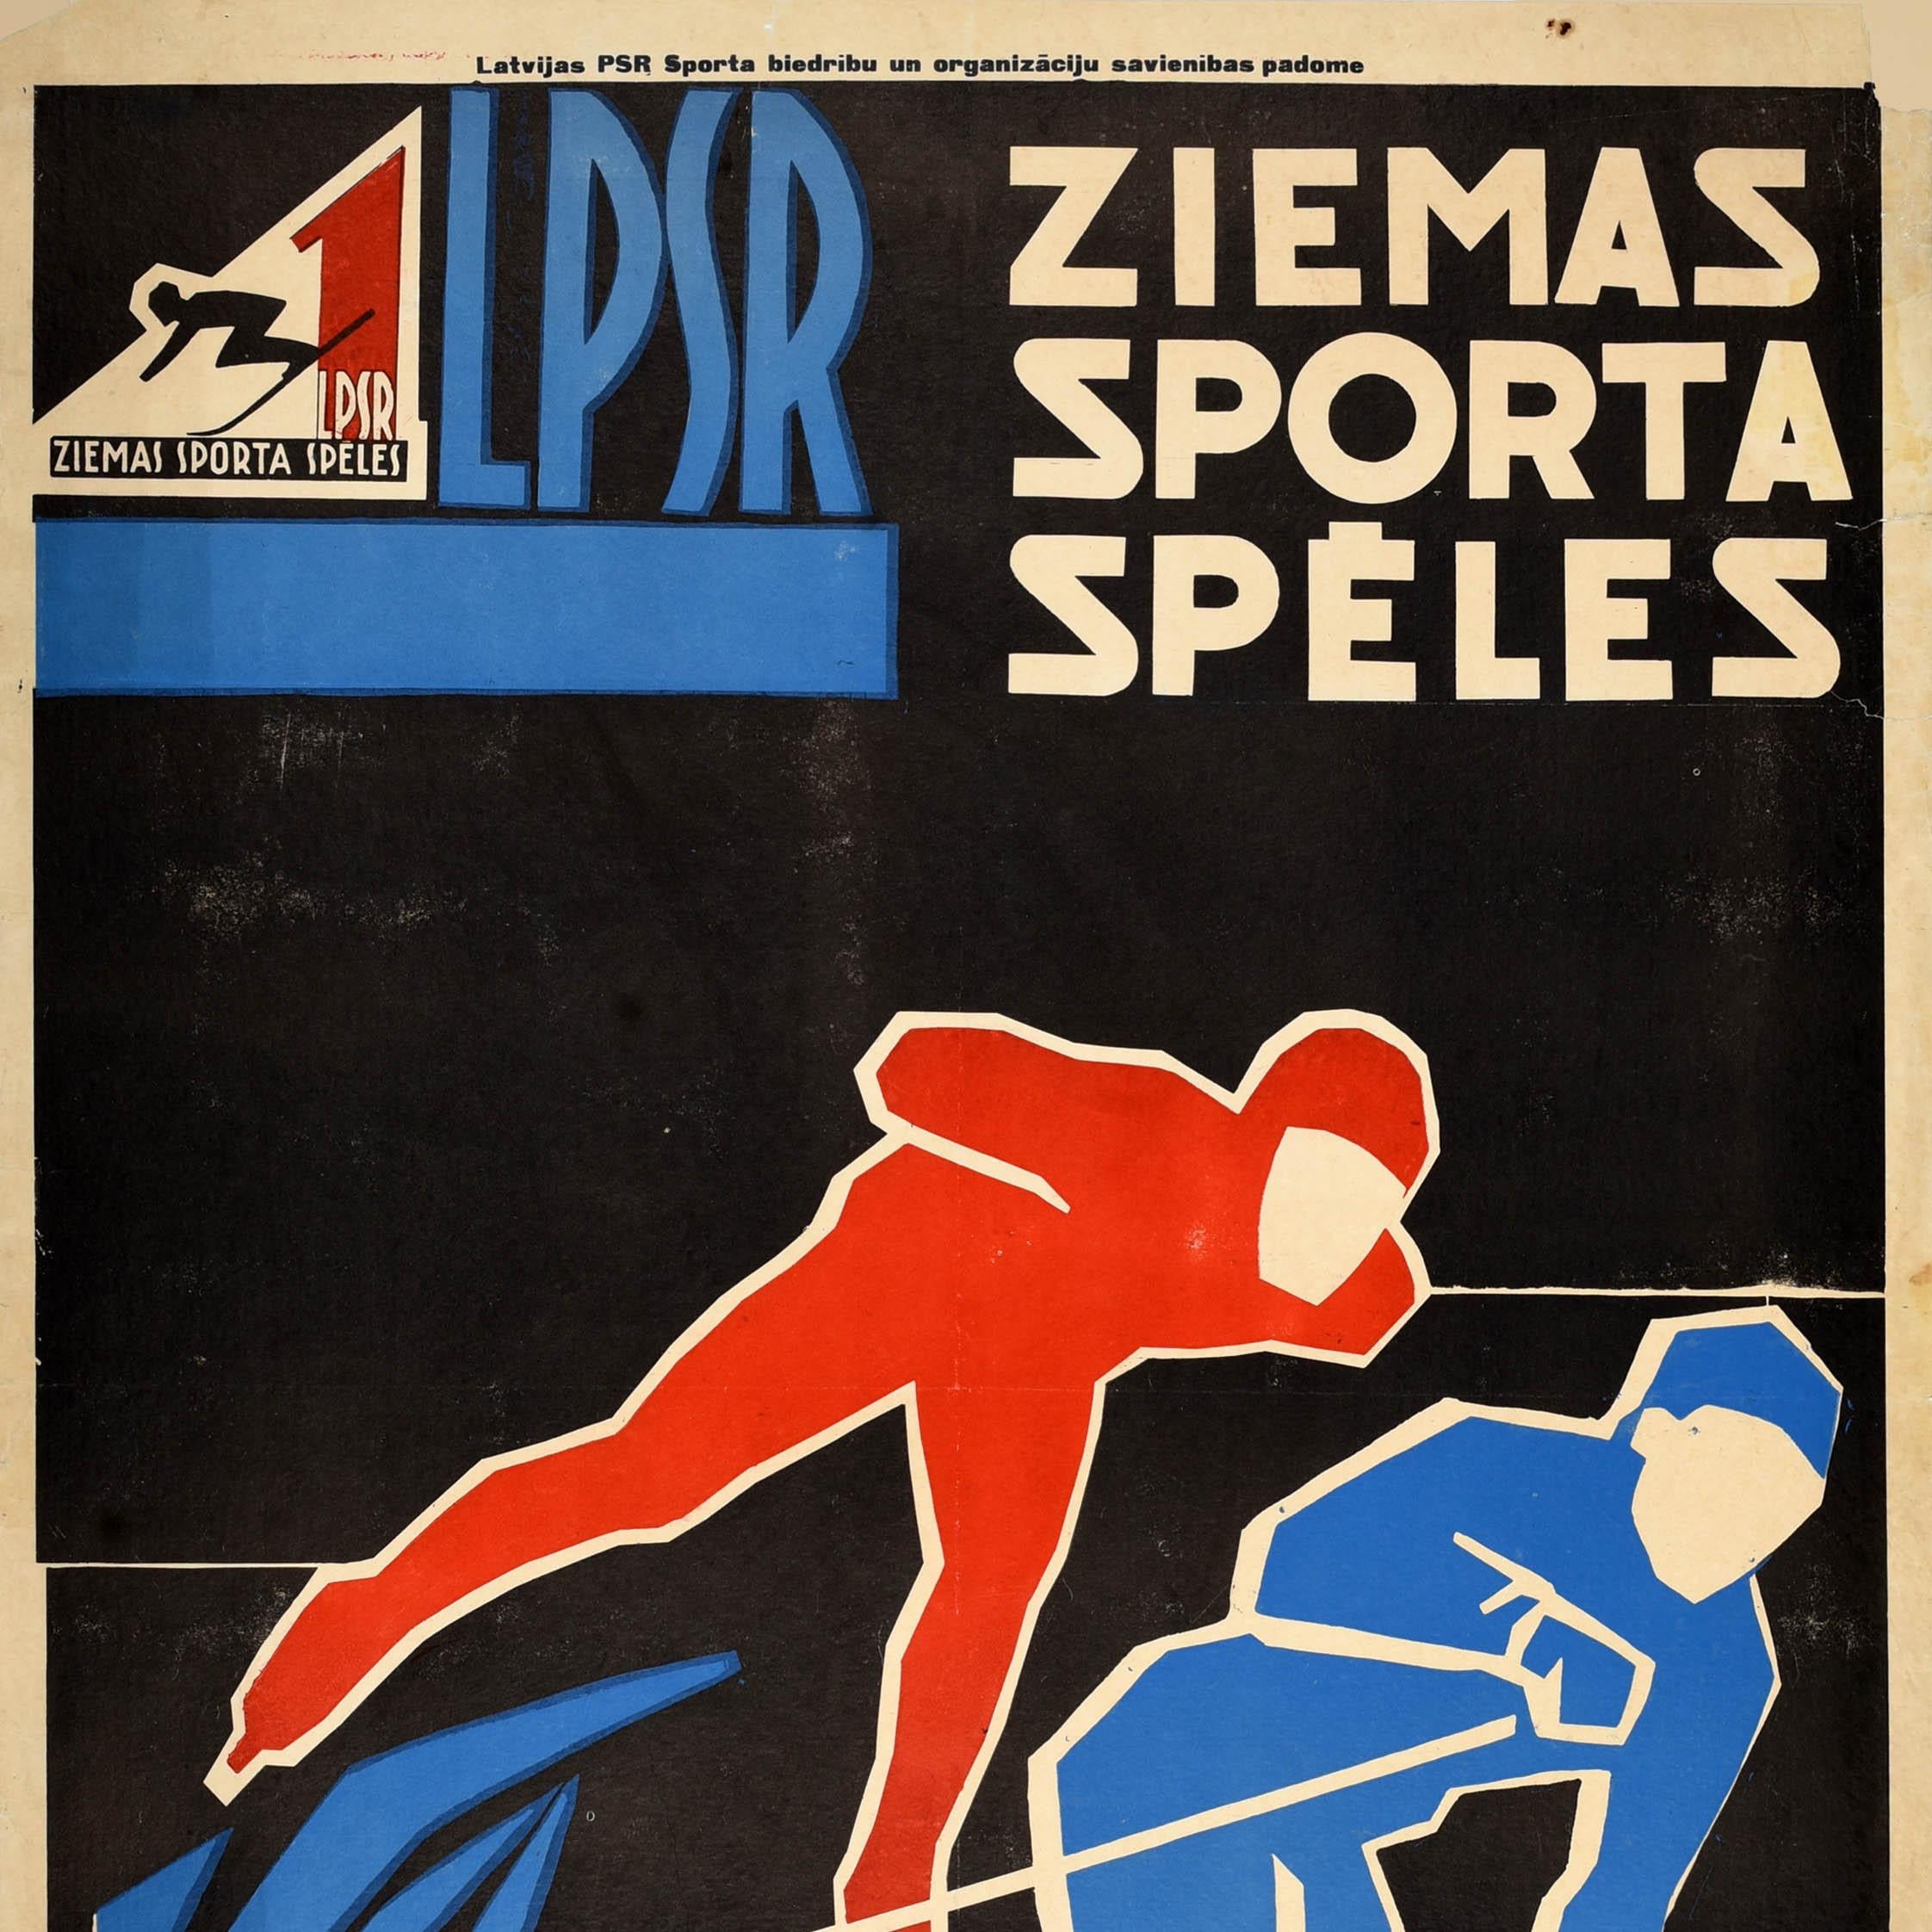 Original vintage sport poster for the Winter Sports Games in Latvia / LSPR Ziemas Sporta Speles issued by The Union of Sports Associations and Organisations of the Latvian SSR featuring a great graphic design depicting an ice skater in red leaning